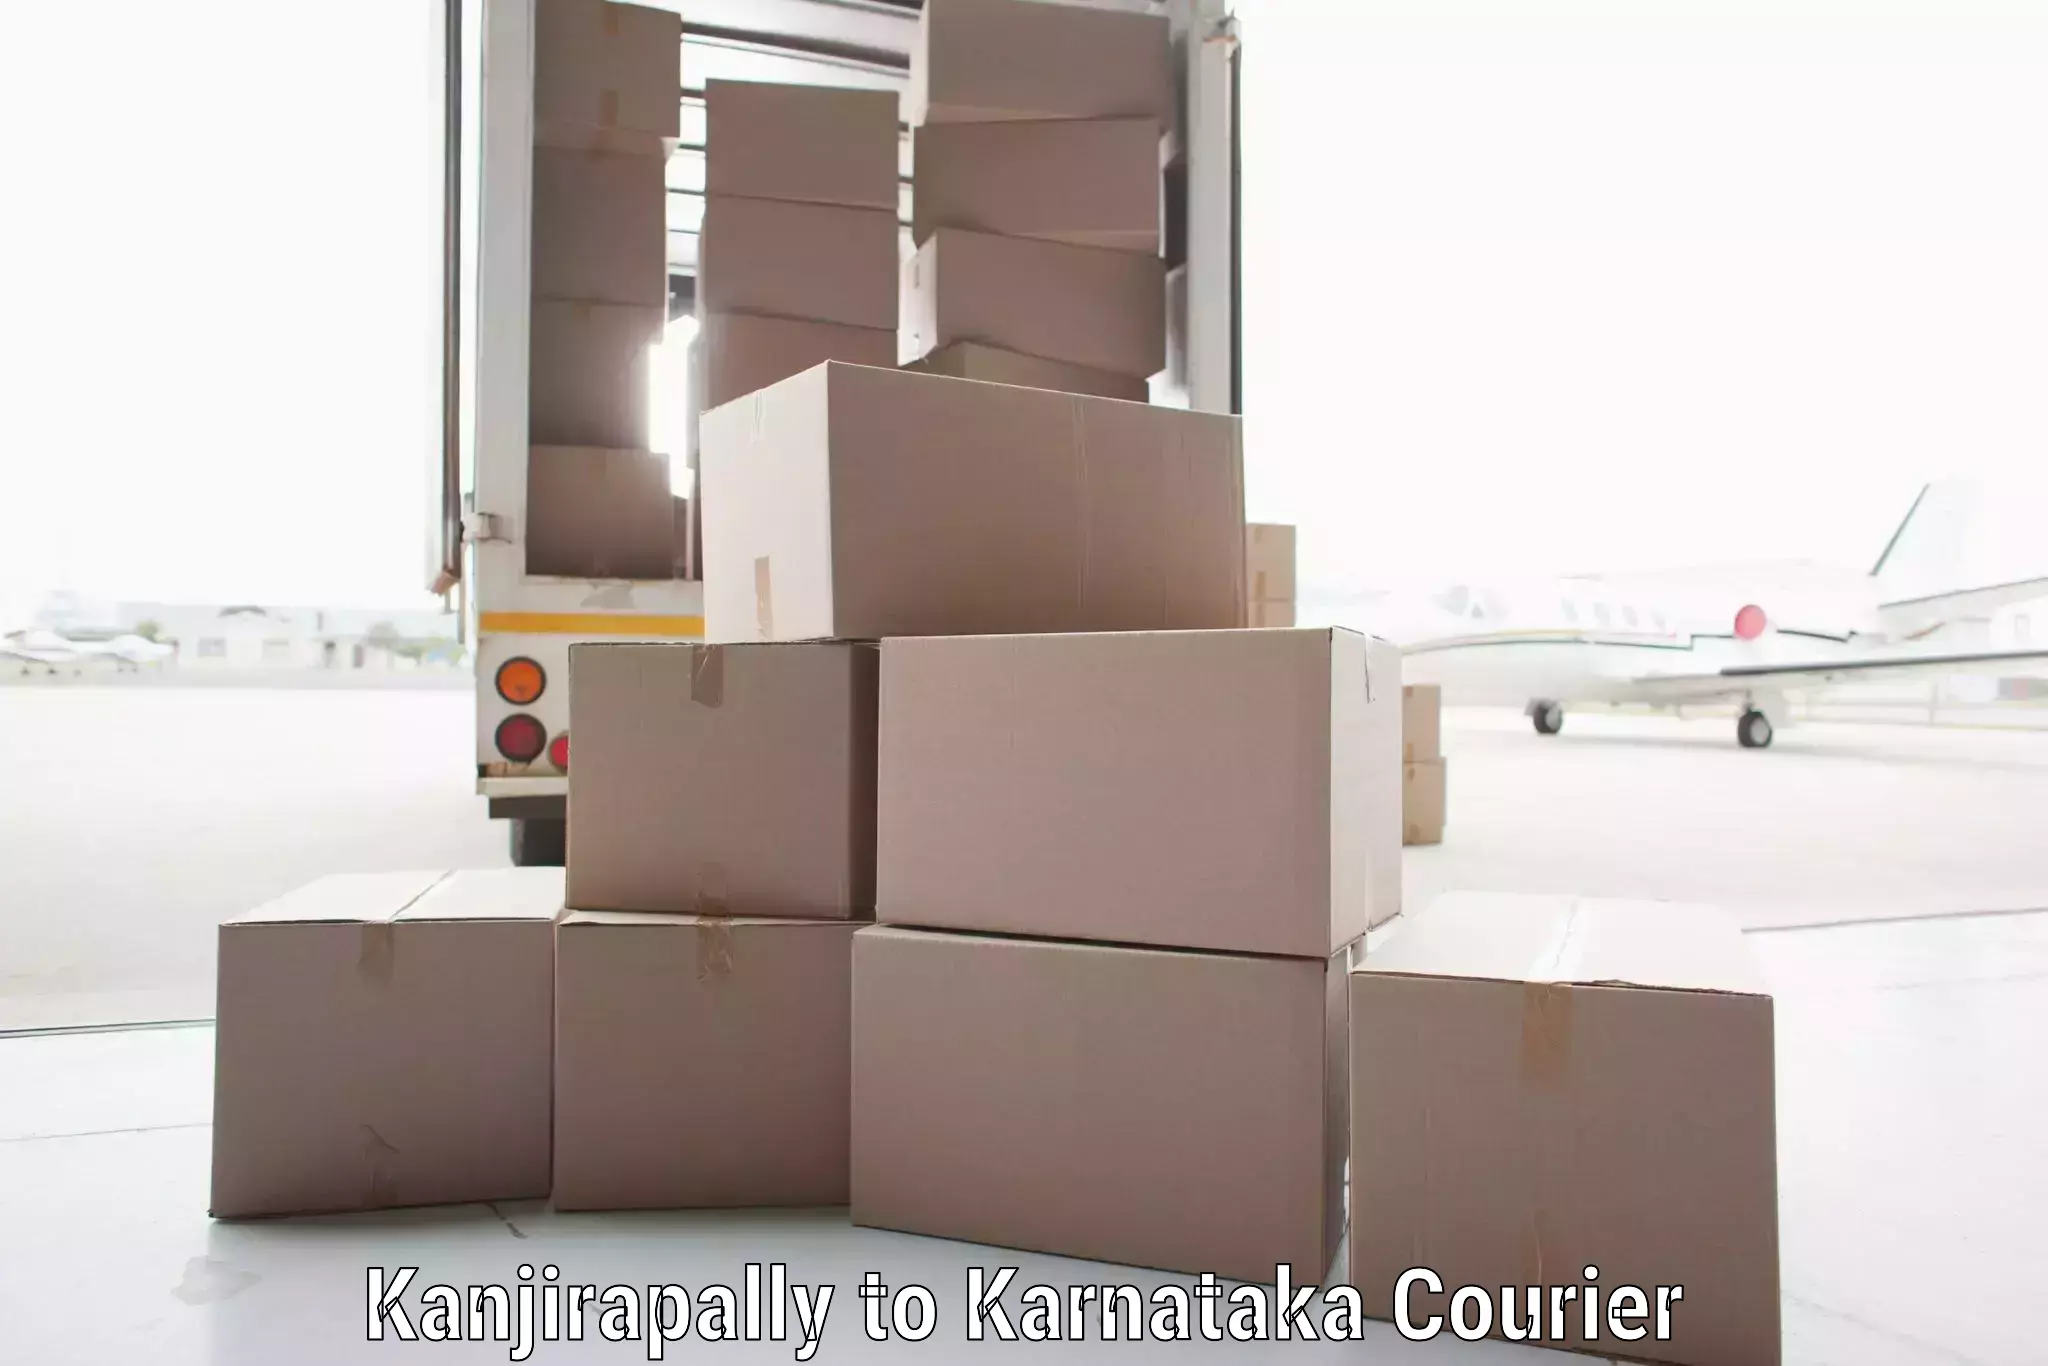 Same-day delivery options Kanjirapally to Yellare